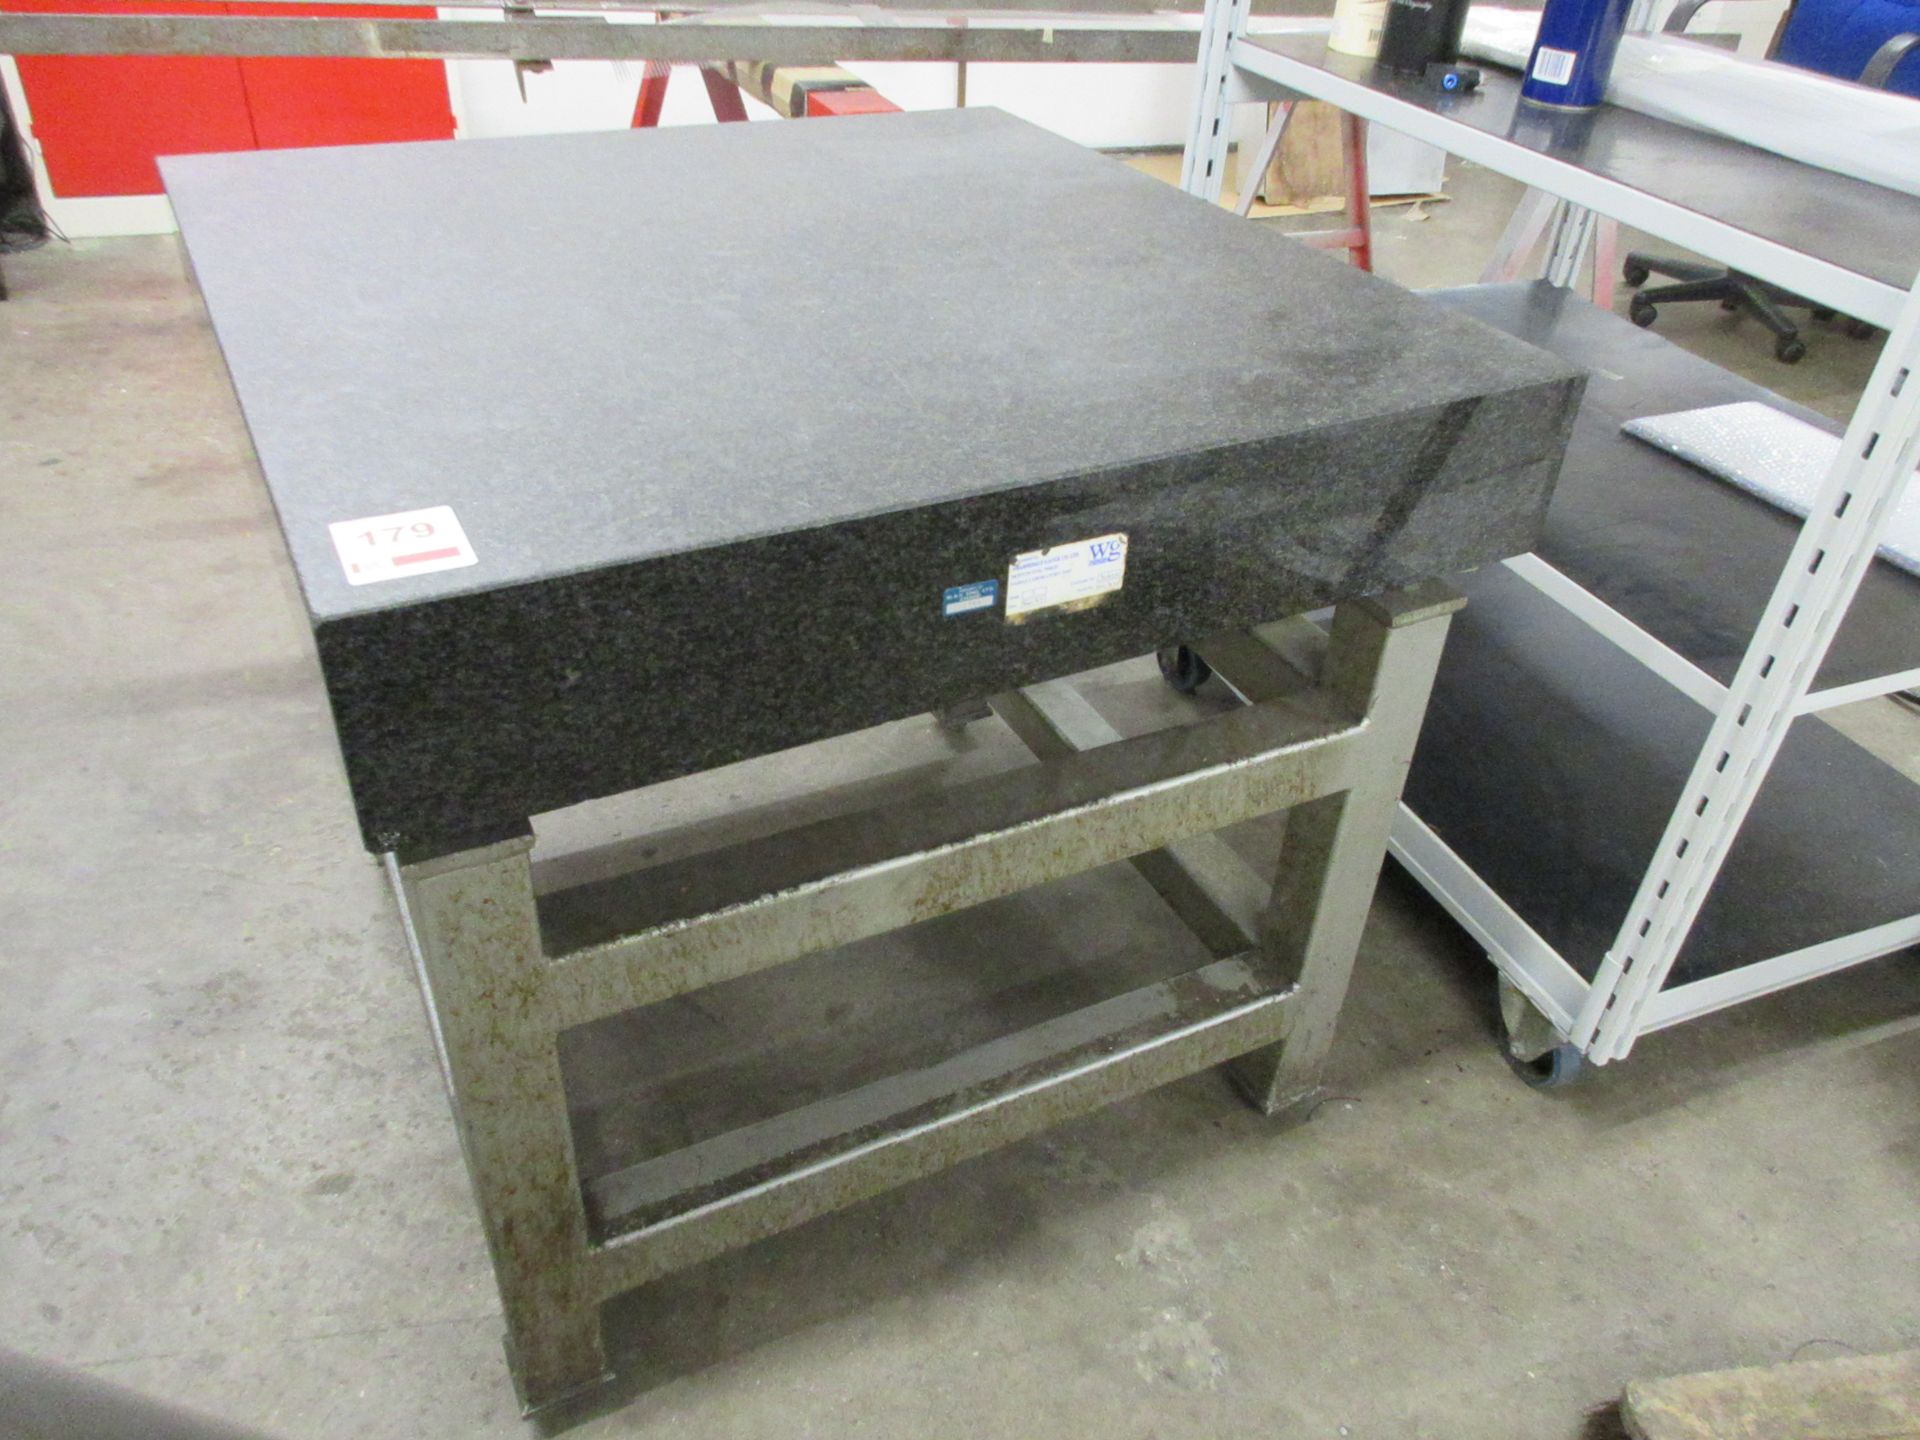 Granite surface table, 3' x 3', mounted on stand